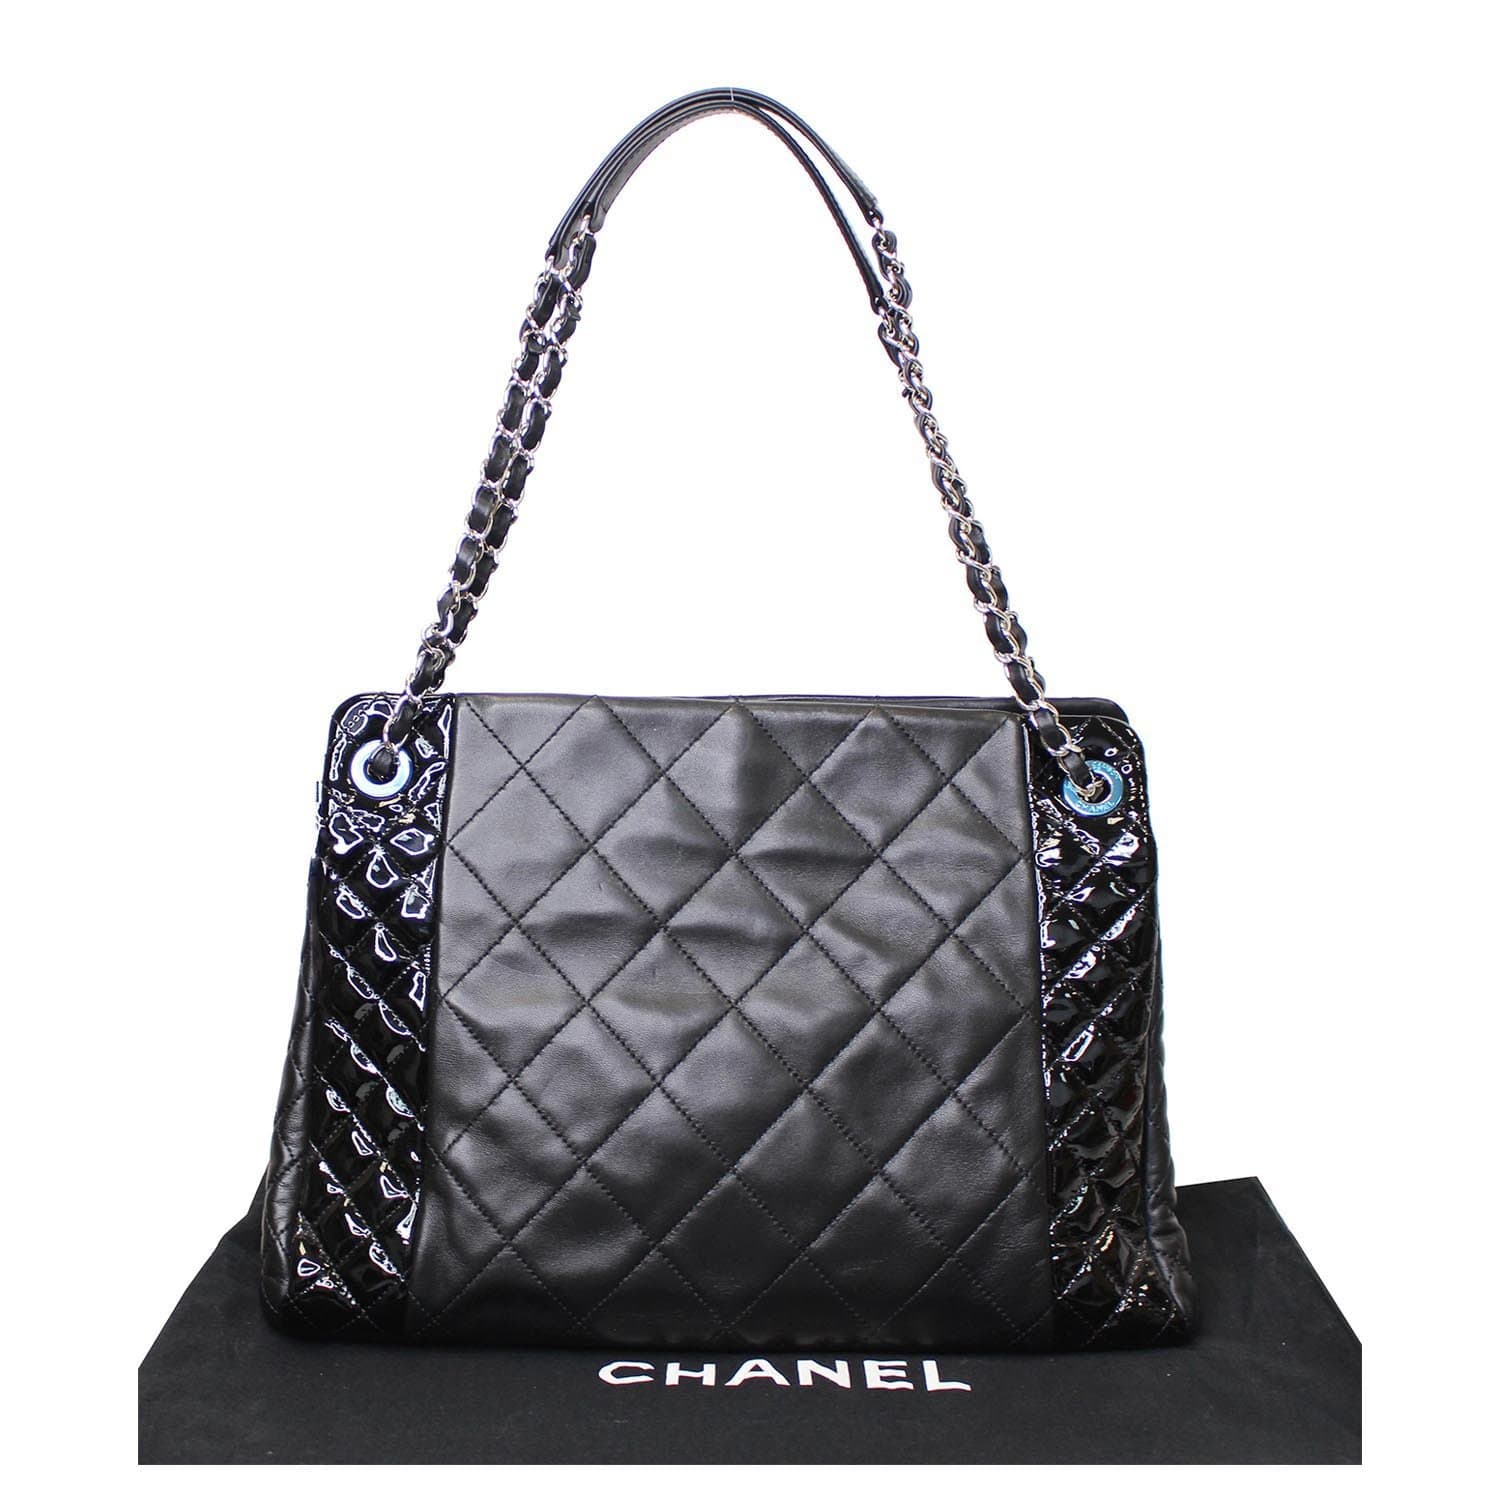 Auth CHANEL Black Leather and Canvas Sport Line Shoulder Tote Bag Purse  #53037